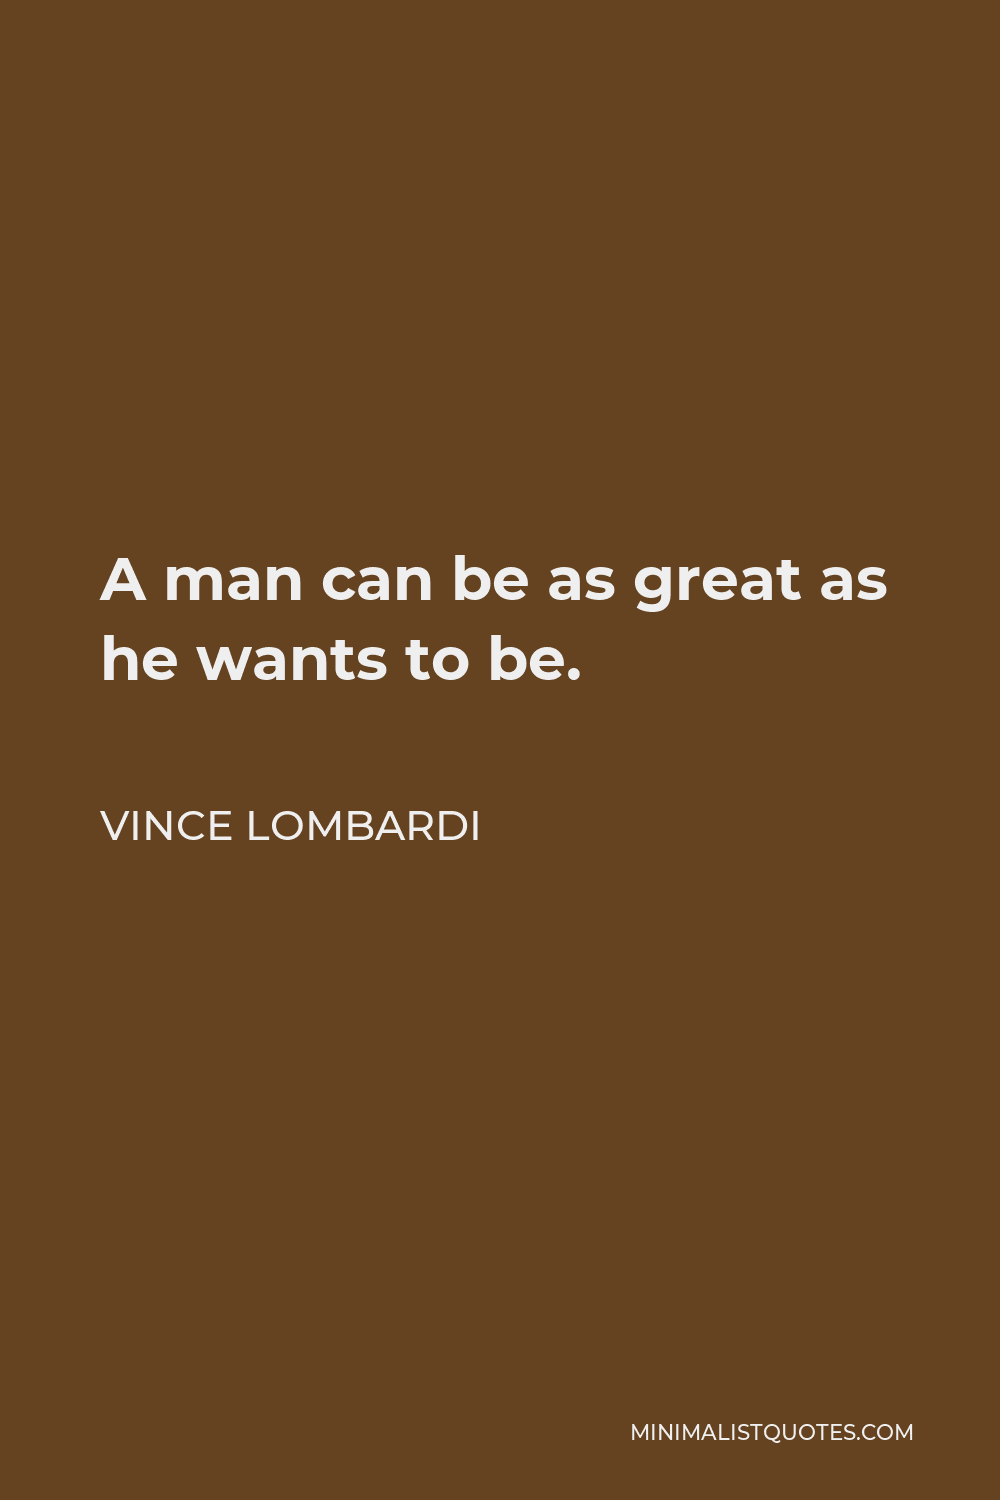 Vince Lombardi Quote - A man can be as great as he wants to be.